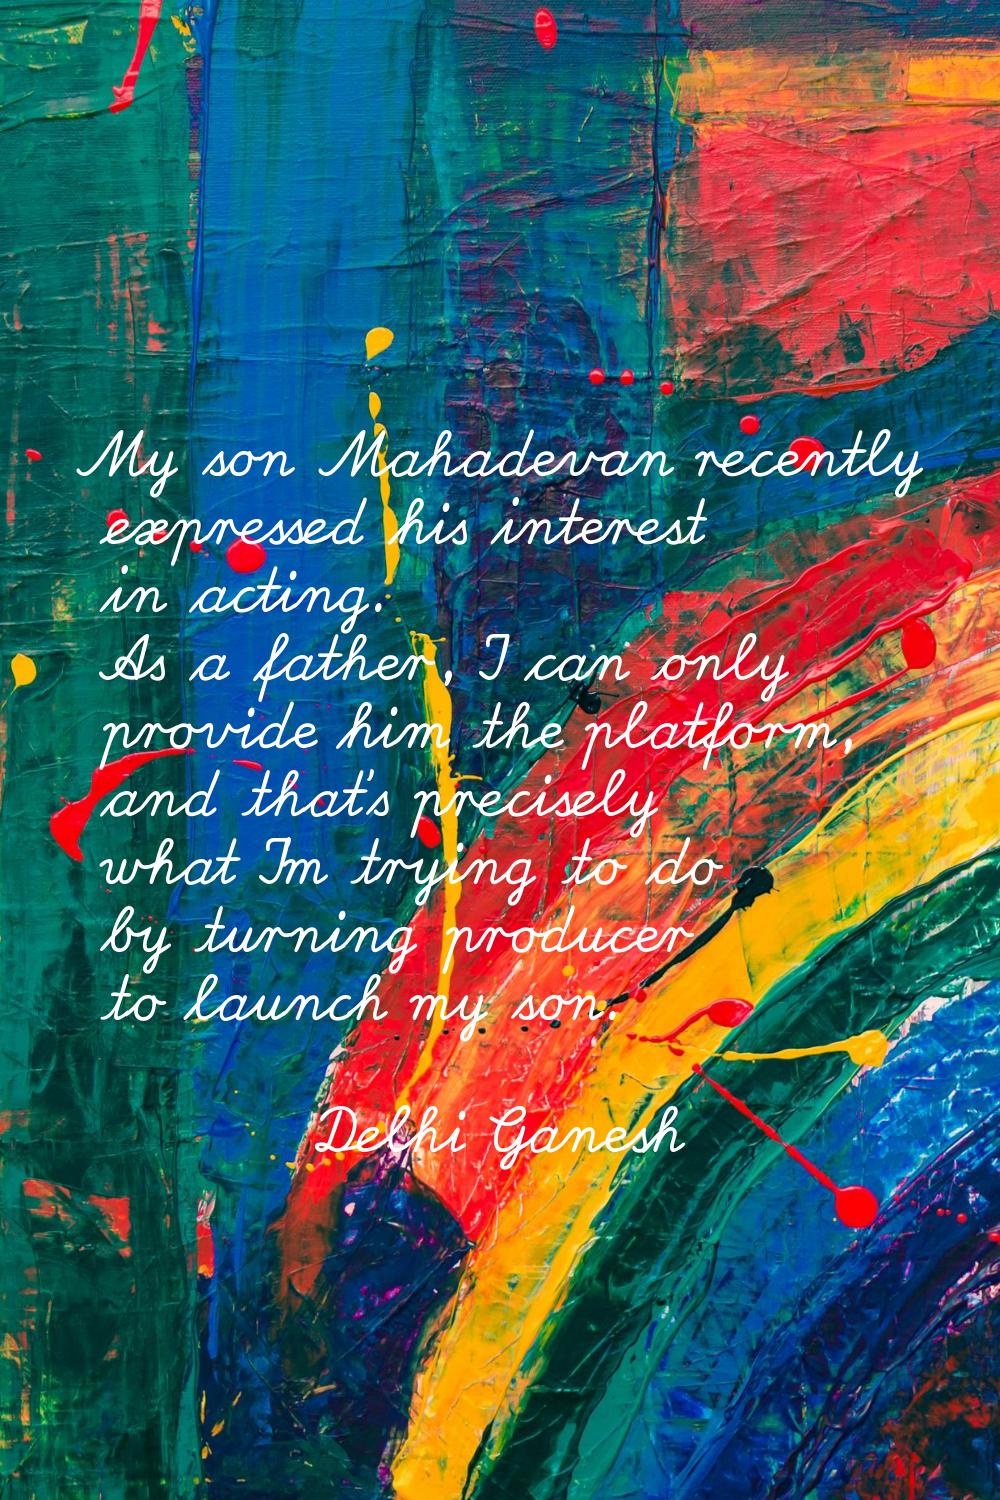 My son Mahadevan recently expressed his interest in acting. As a father, I can only provide him the